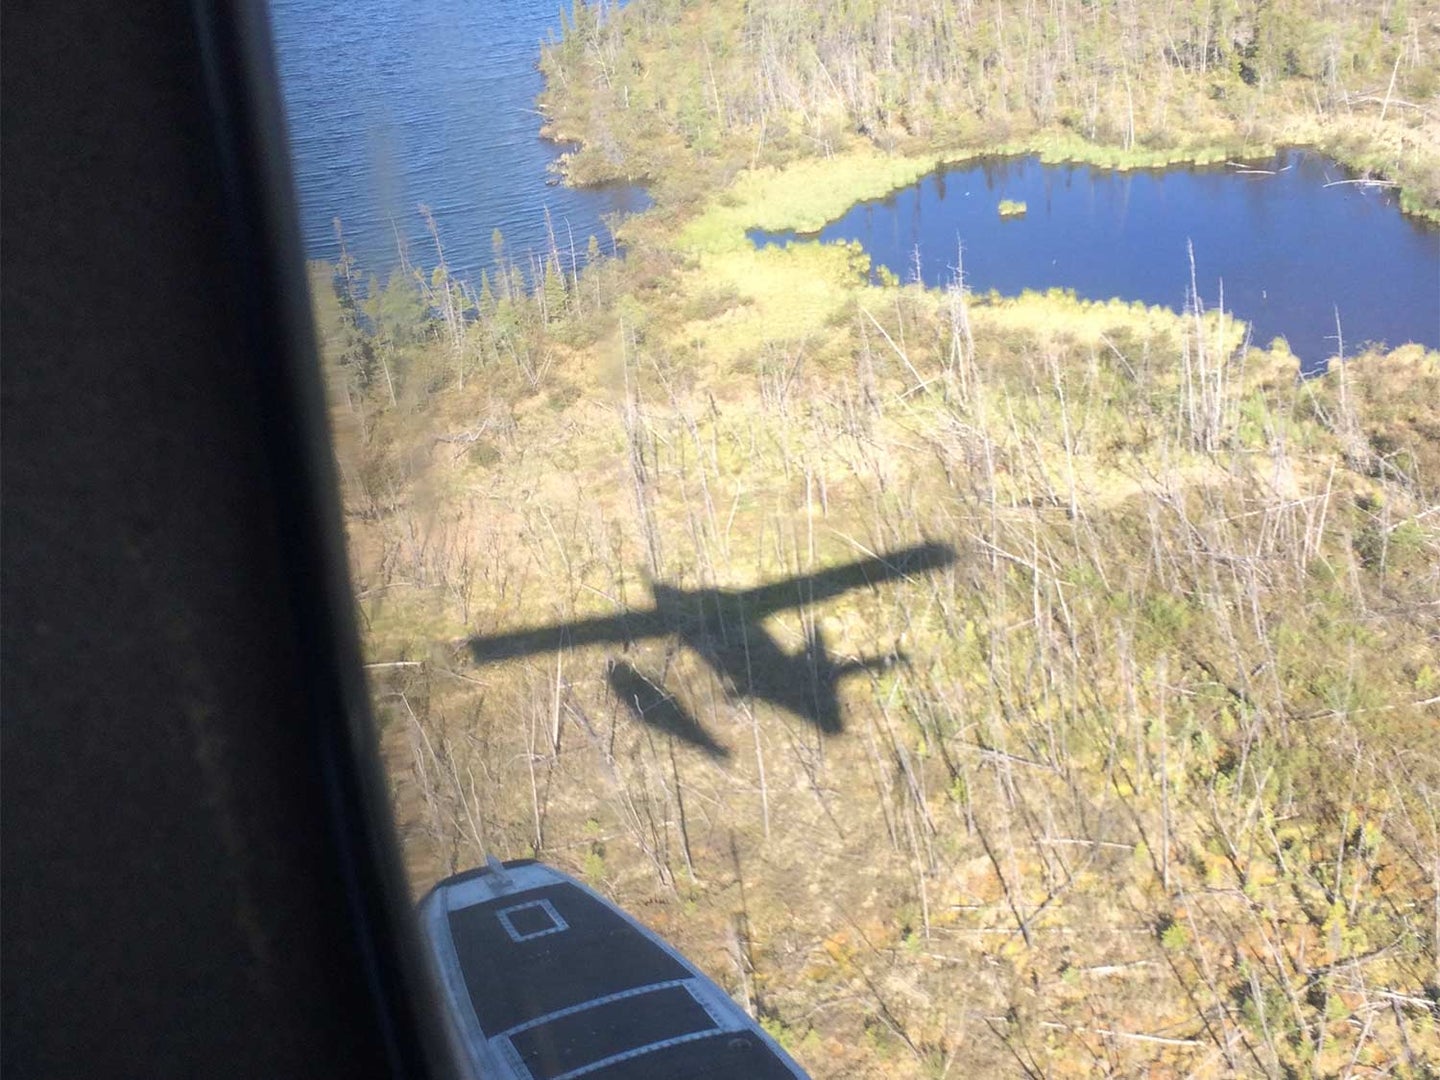 A shadow of a float plane on the grounds below it.